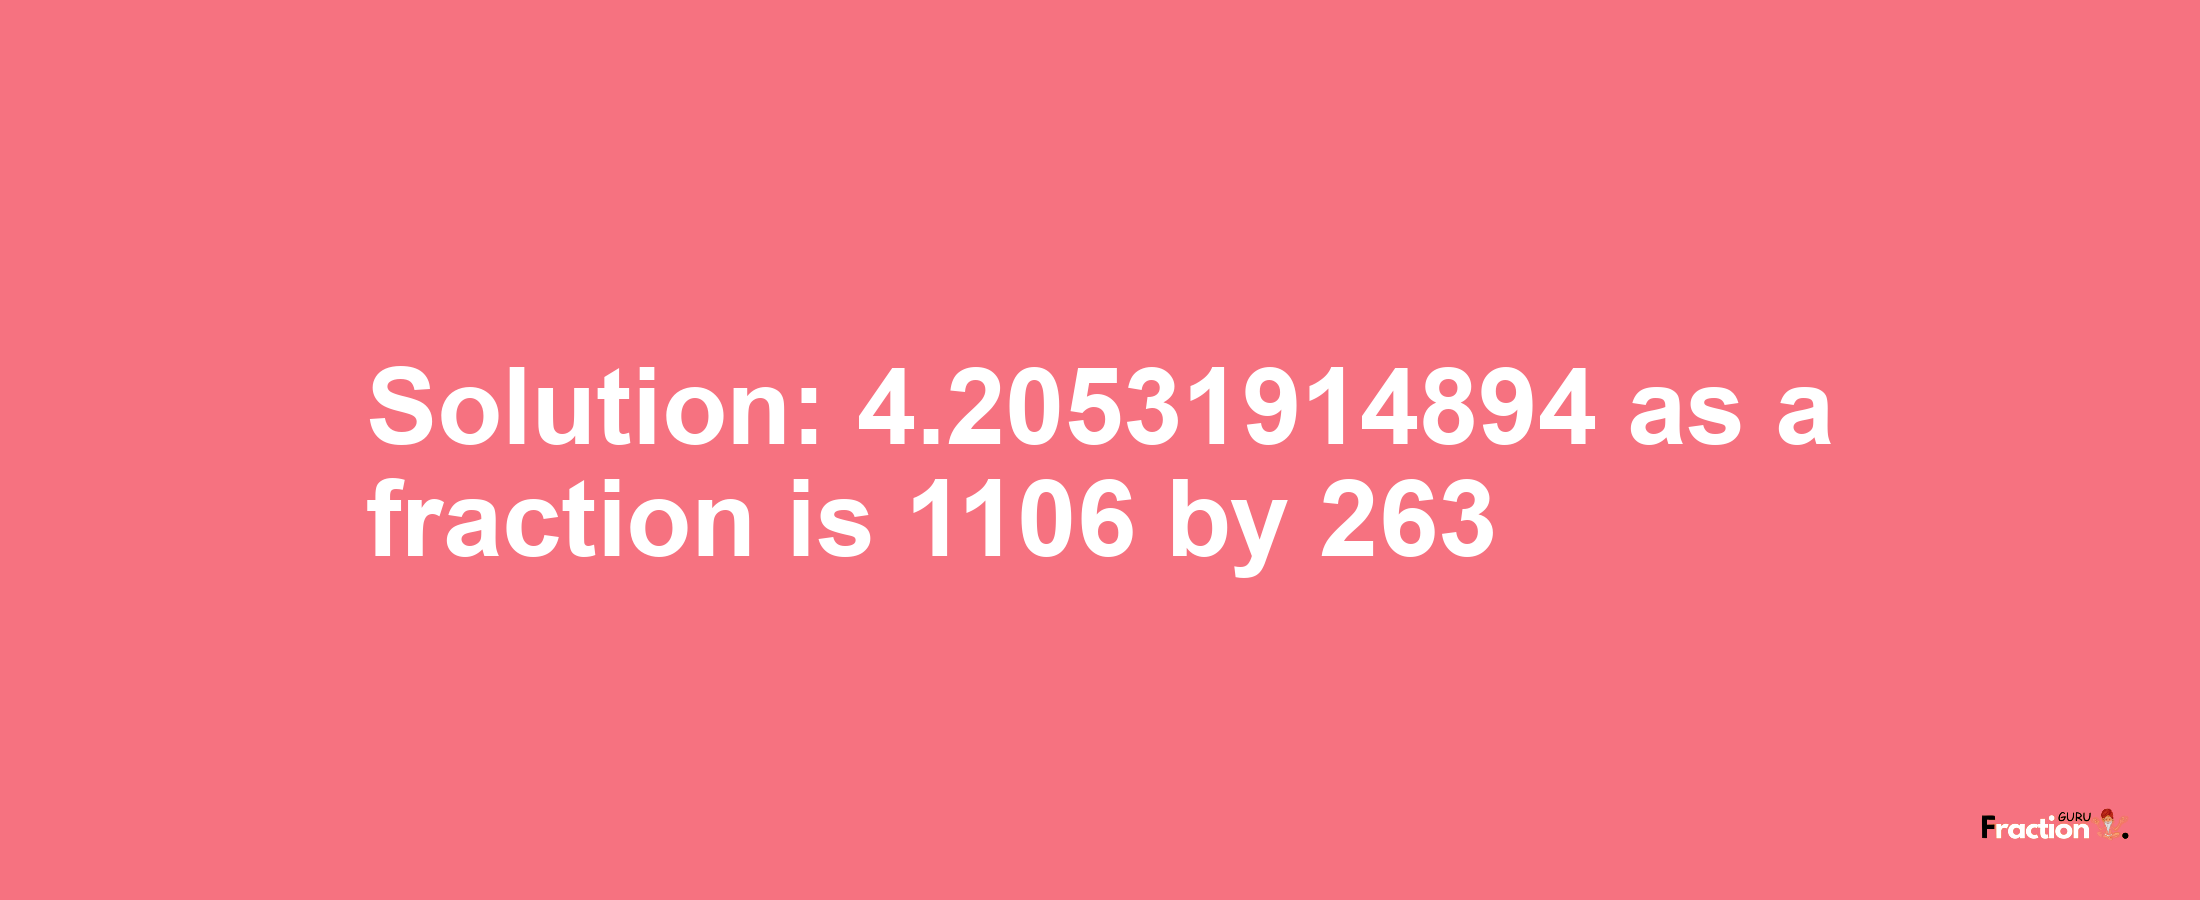 Solution:4.20531914894 as a fraction is 1106/263